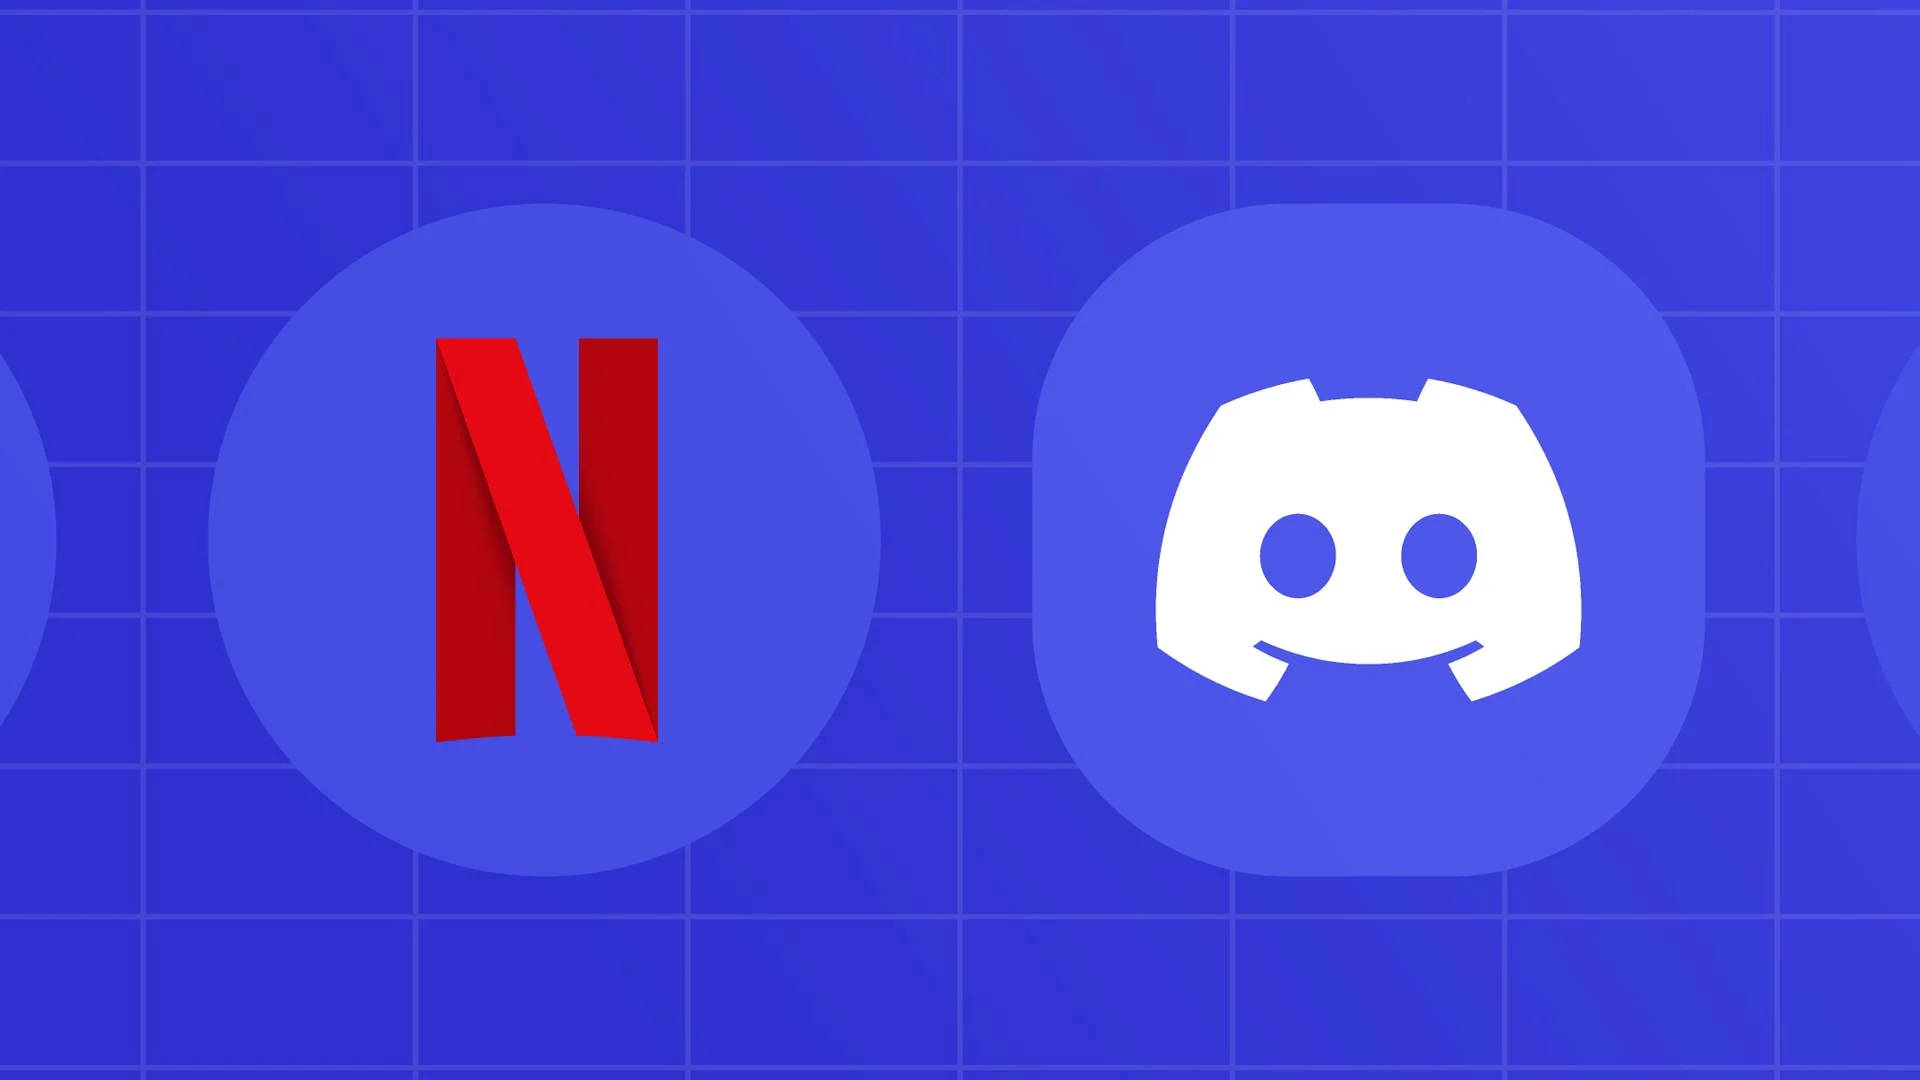 How to Stream Netflix on Discord